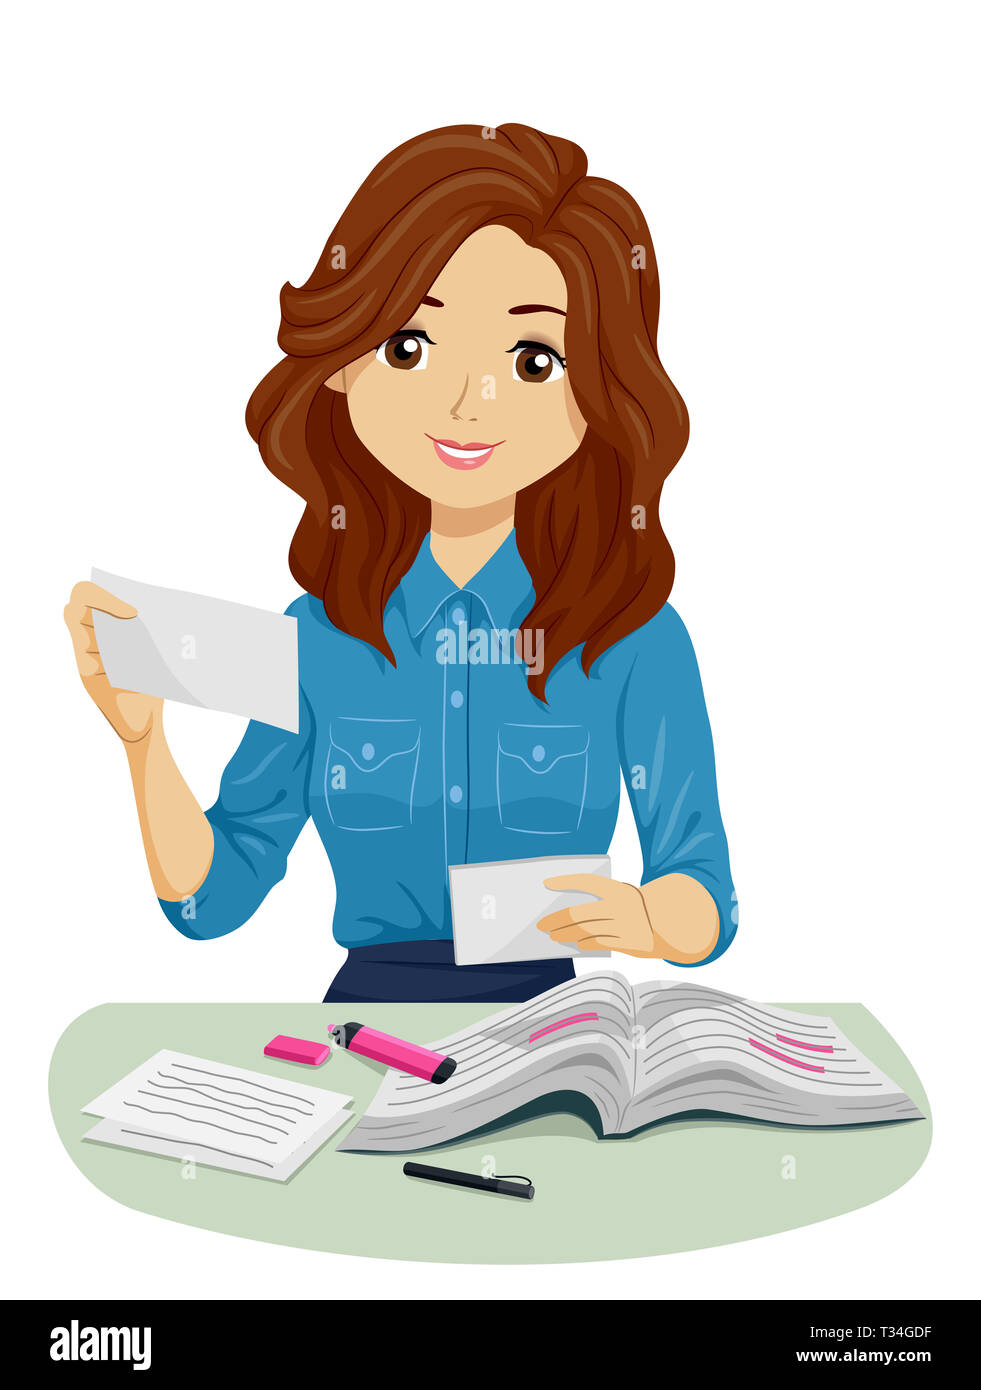 Illustration of a Teenage Girl Holding Flash Cards with Books and Markers  Studying Stock Photo - Alamy